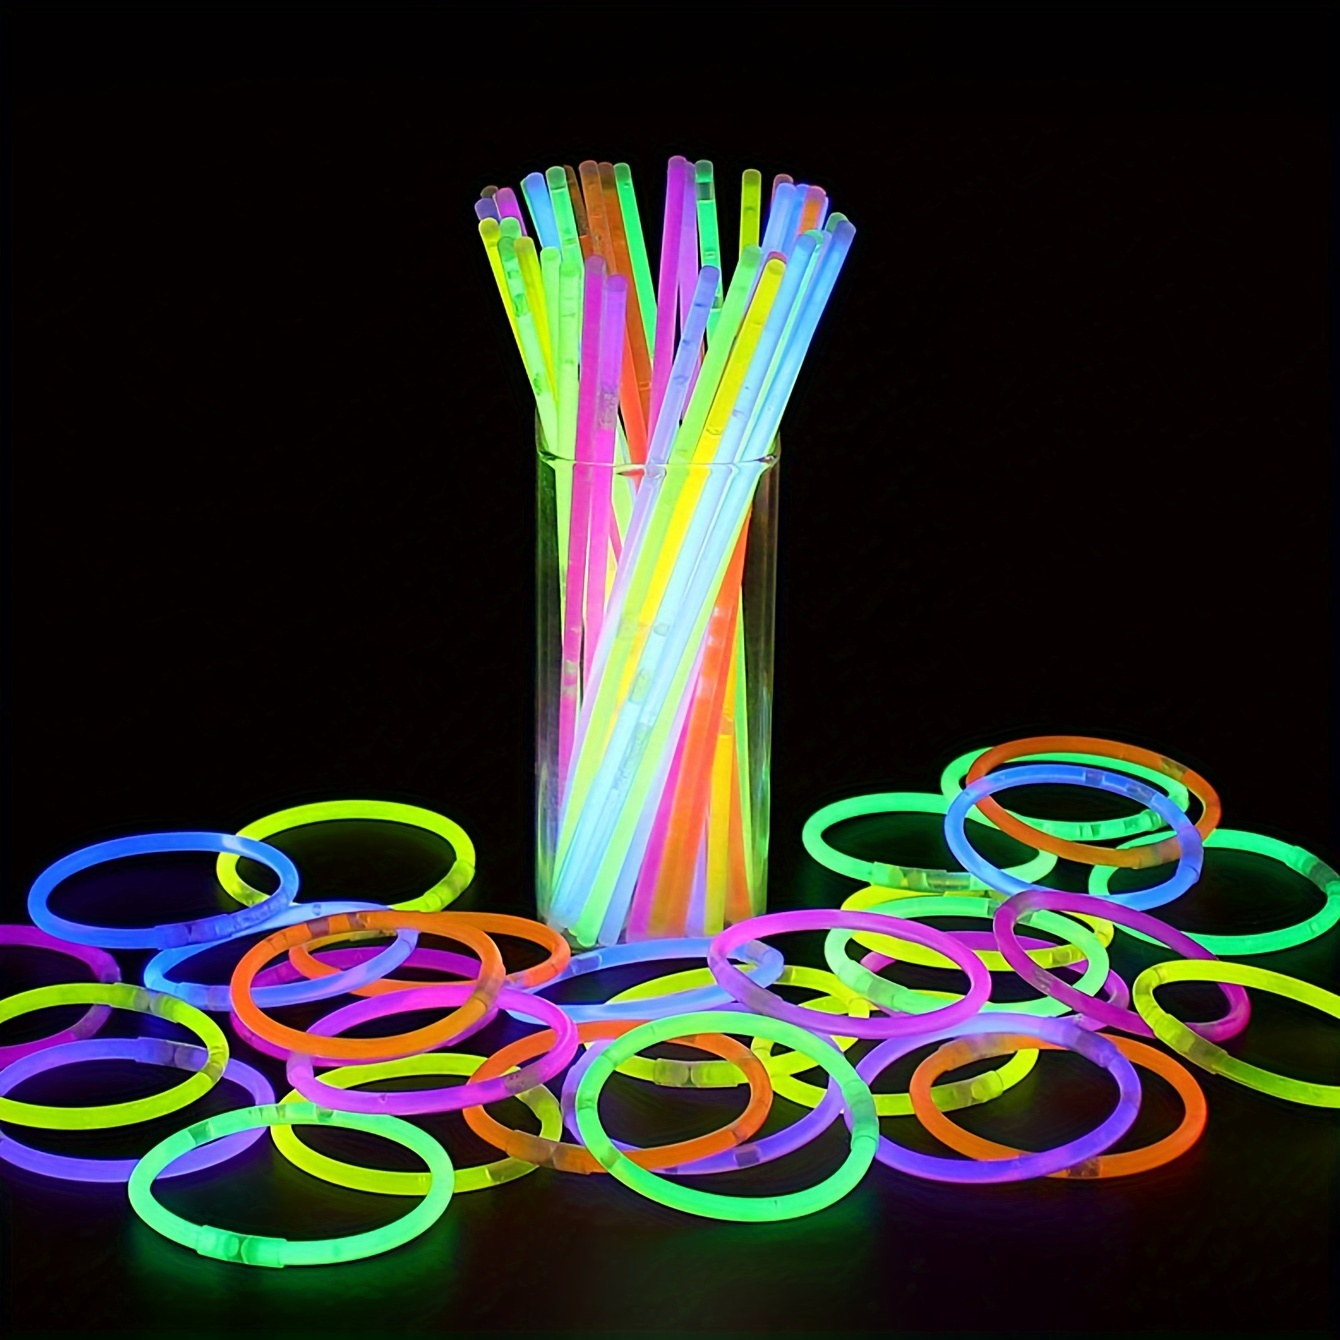 

50pcs/100pcs, Glow Stick Bracelets Light-up Toys Disposable Glowsticks Night Lights Concert Props Holiday Party Accessories Holiday Party Gifts